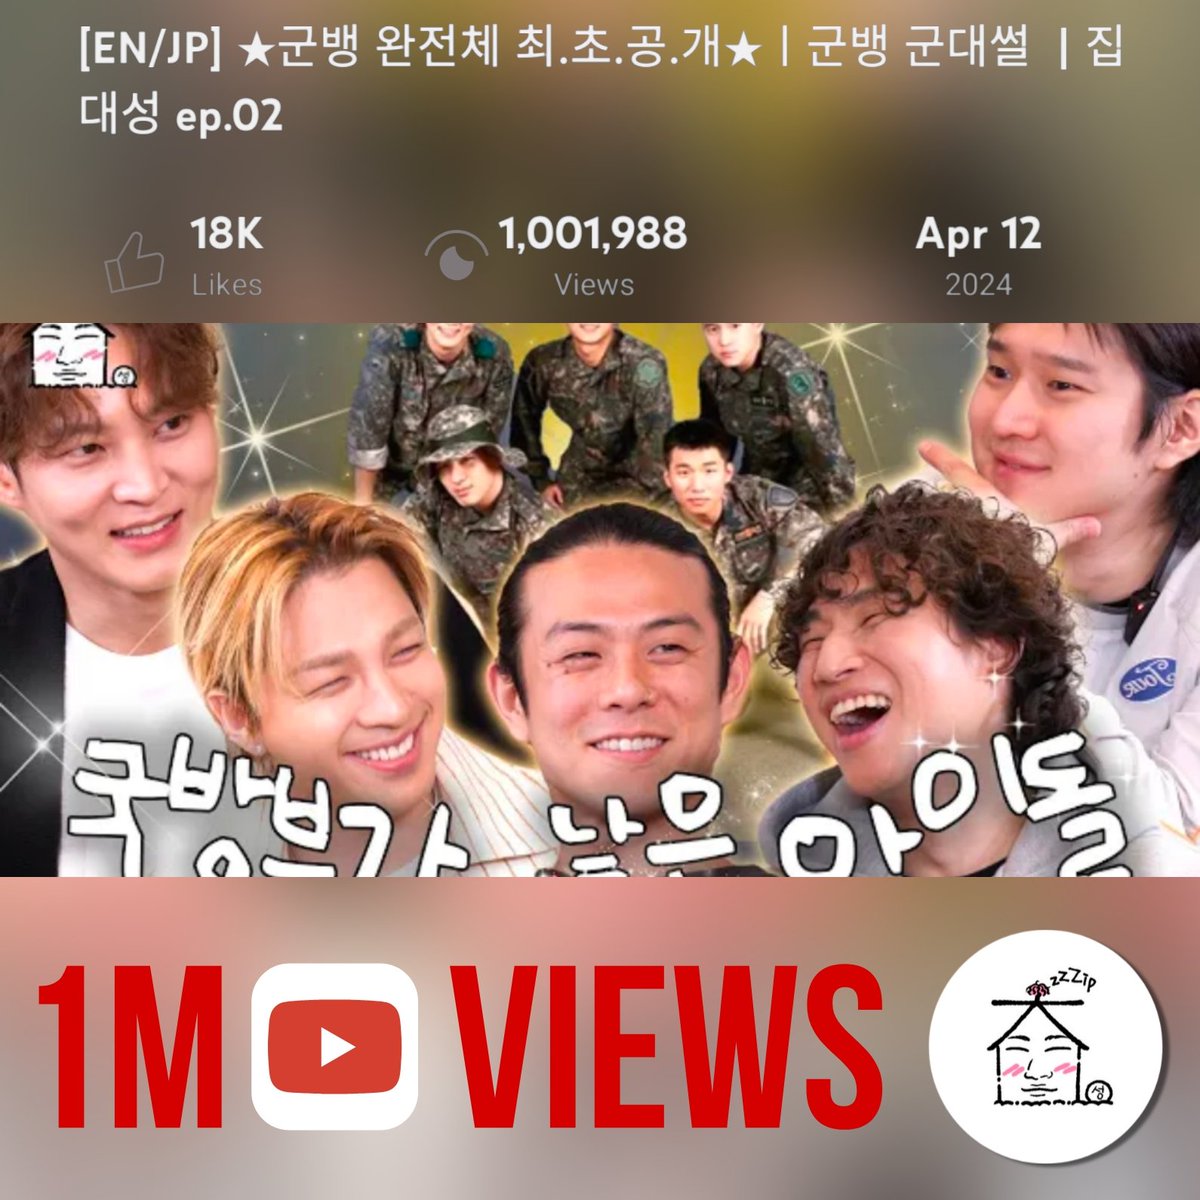 📢GLOBAL VIP Zip Daesung Ep. 02 with Gunbang is the first episode to surpassed 1M views on youtube! 🥳 Please subscribe Daesung's friendly youtube show for more videos weekly. 🔗youtube.com/@ZIP_DS?si=ydt… #DLITE #DAESUNG #대성 #빅뱅 #BIGBANG